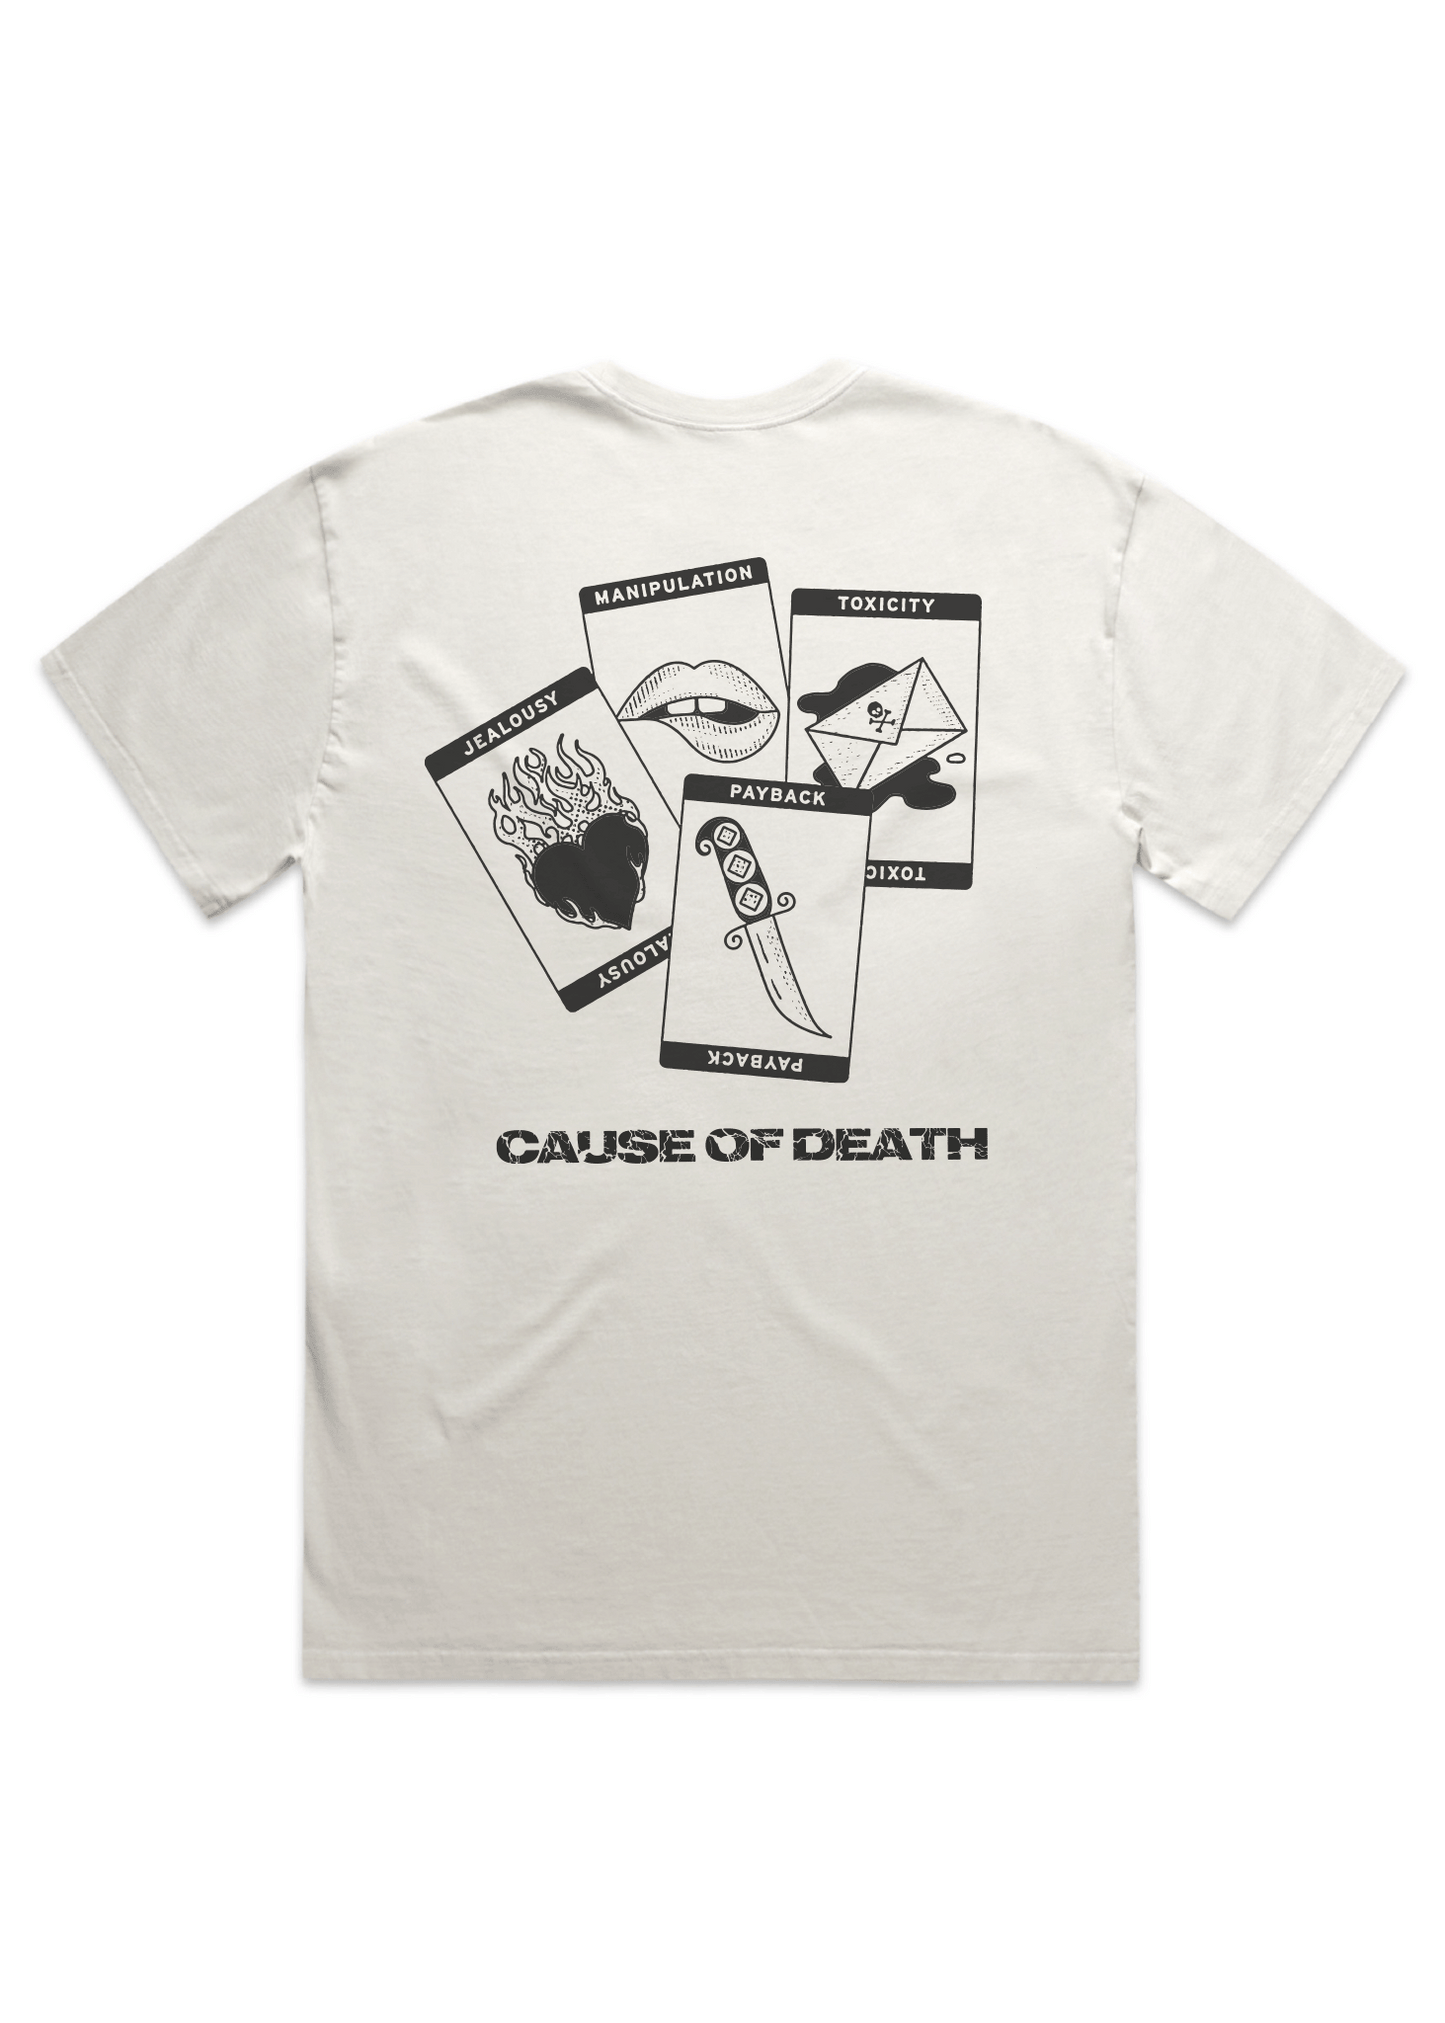 Cause of Death Tee